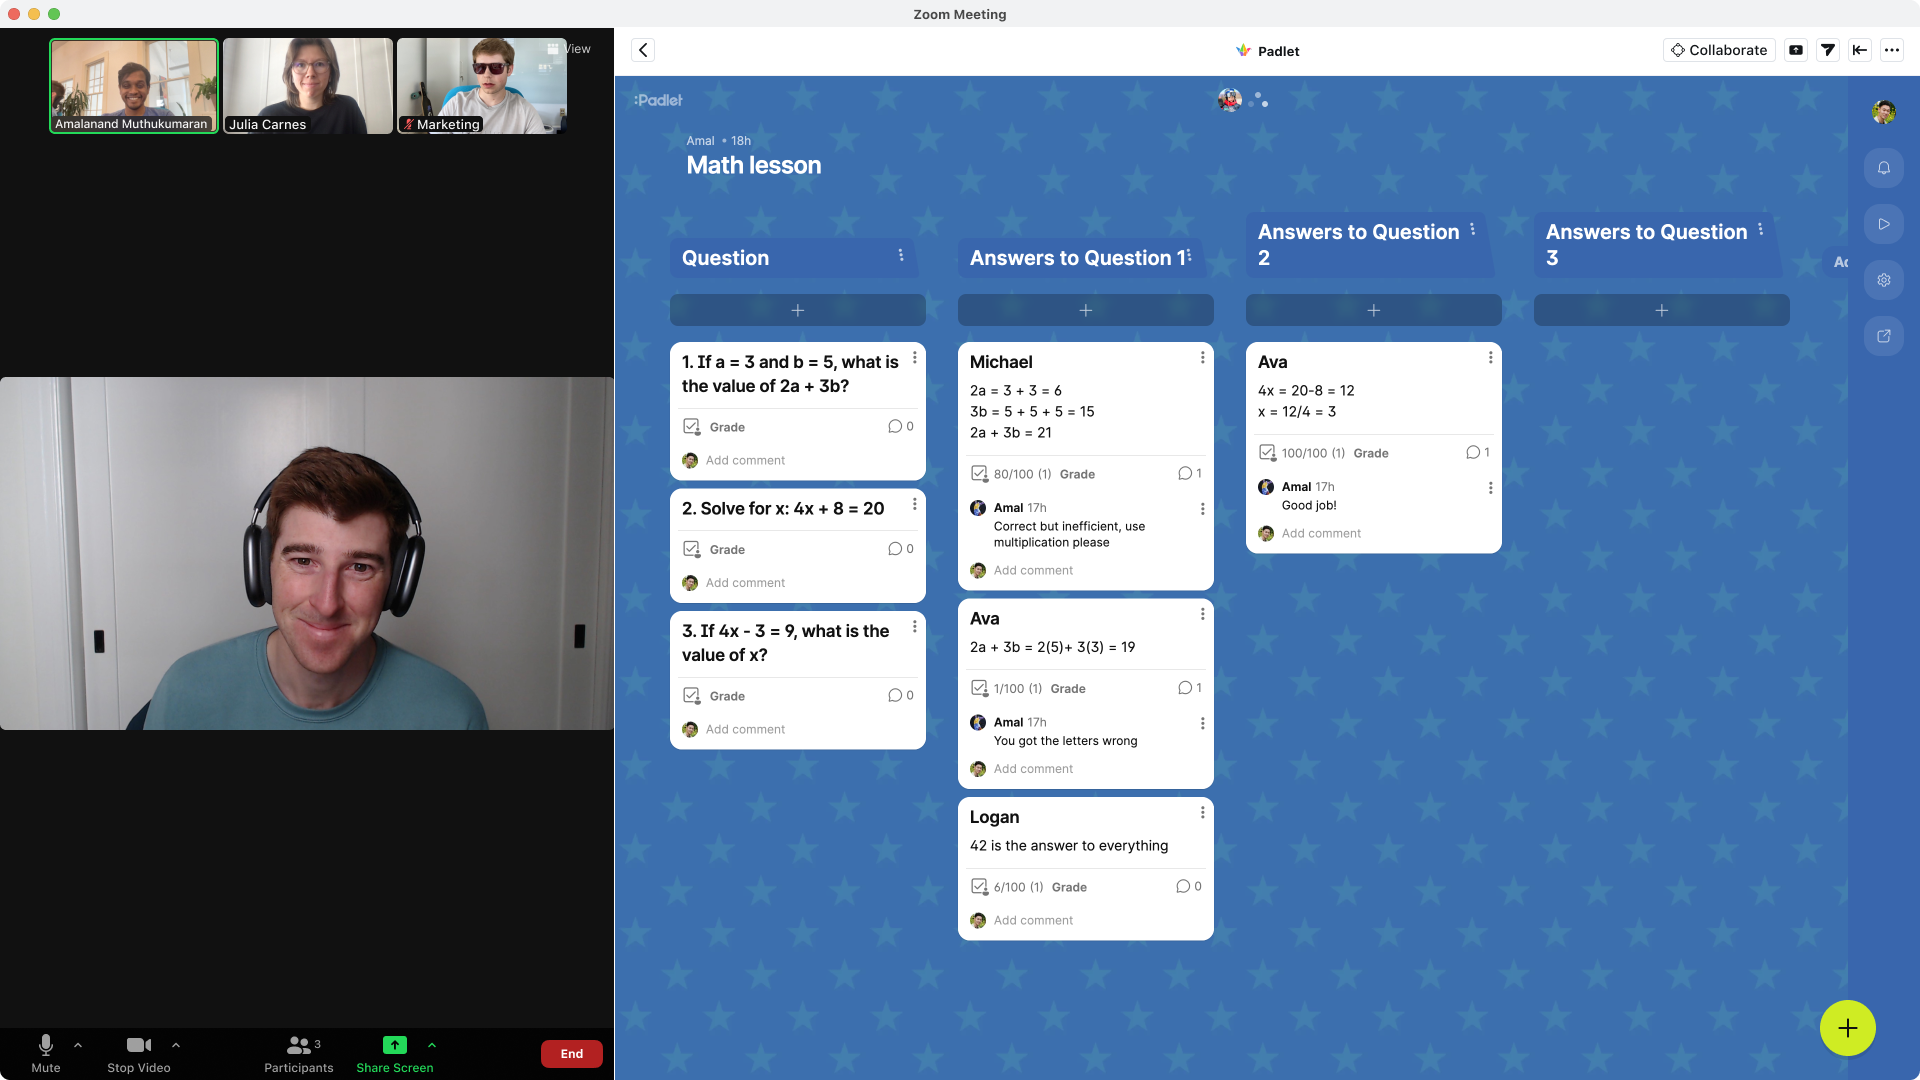 The padlet zoom app in action. A zoom meeting screen alongside a padlet with a blue wallpaper.